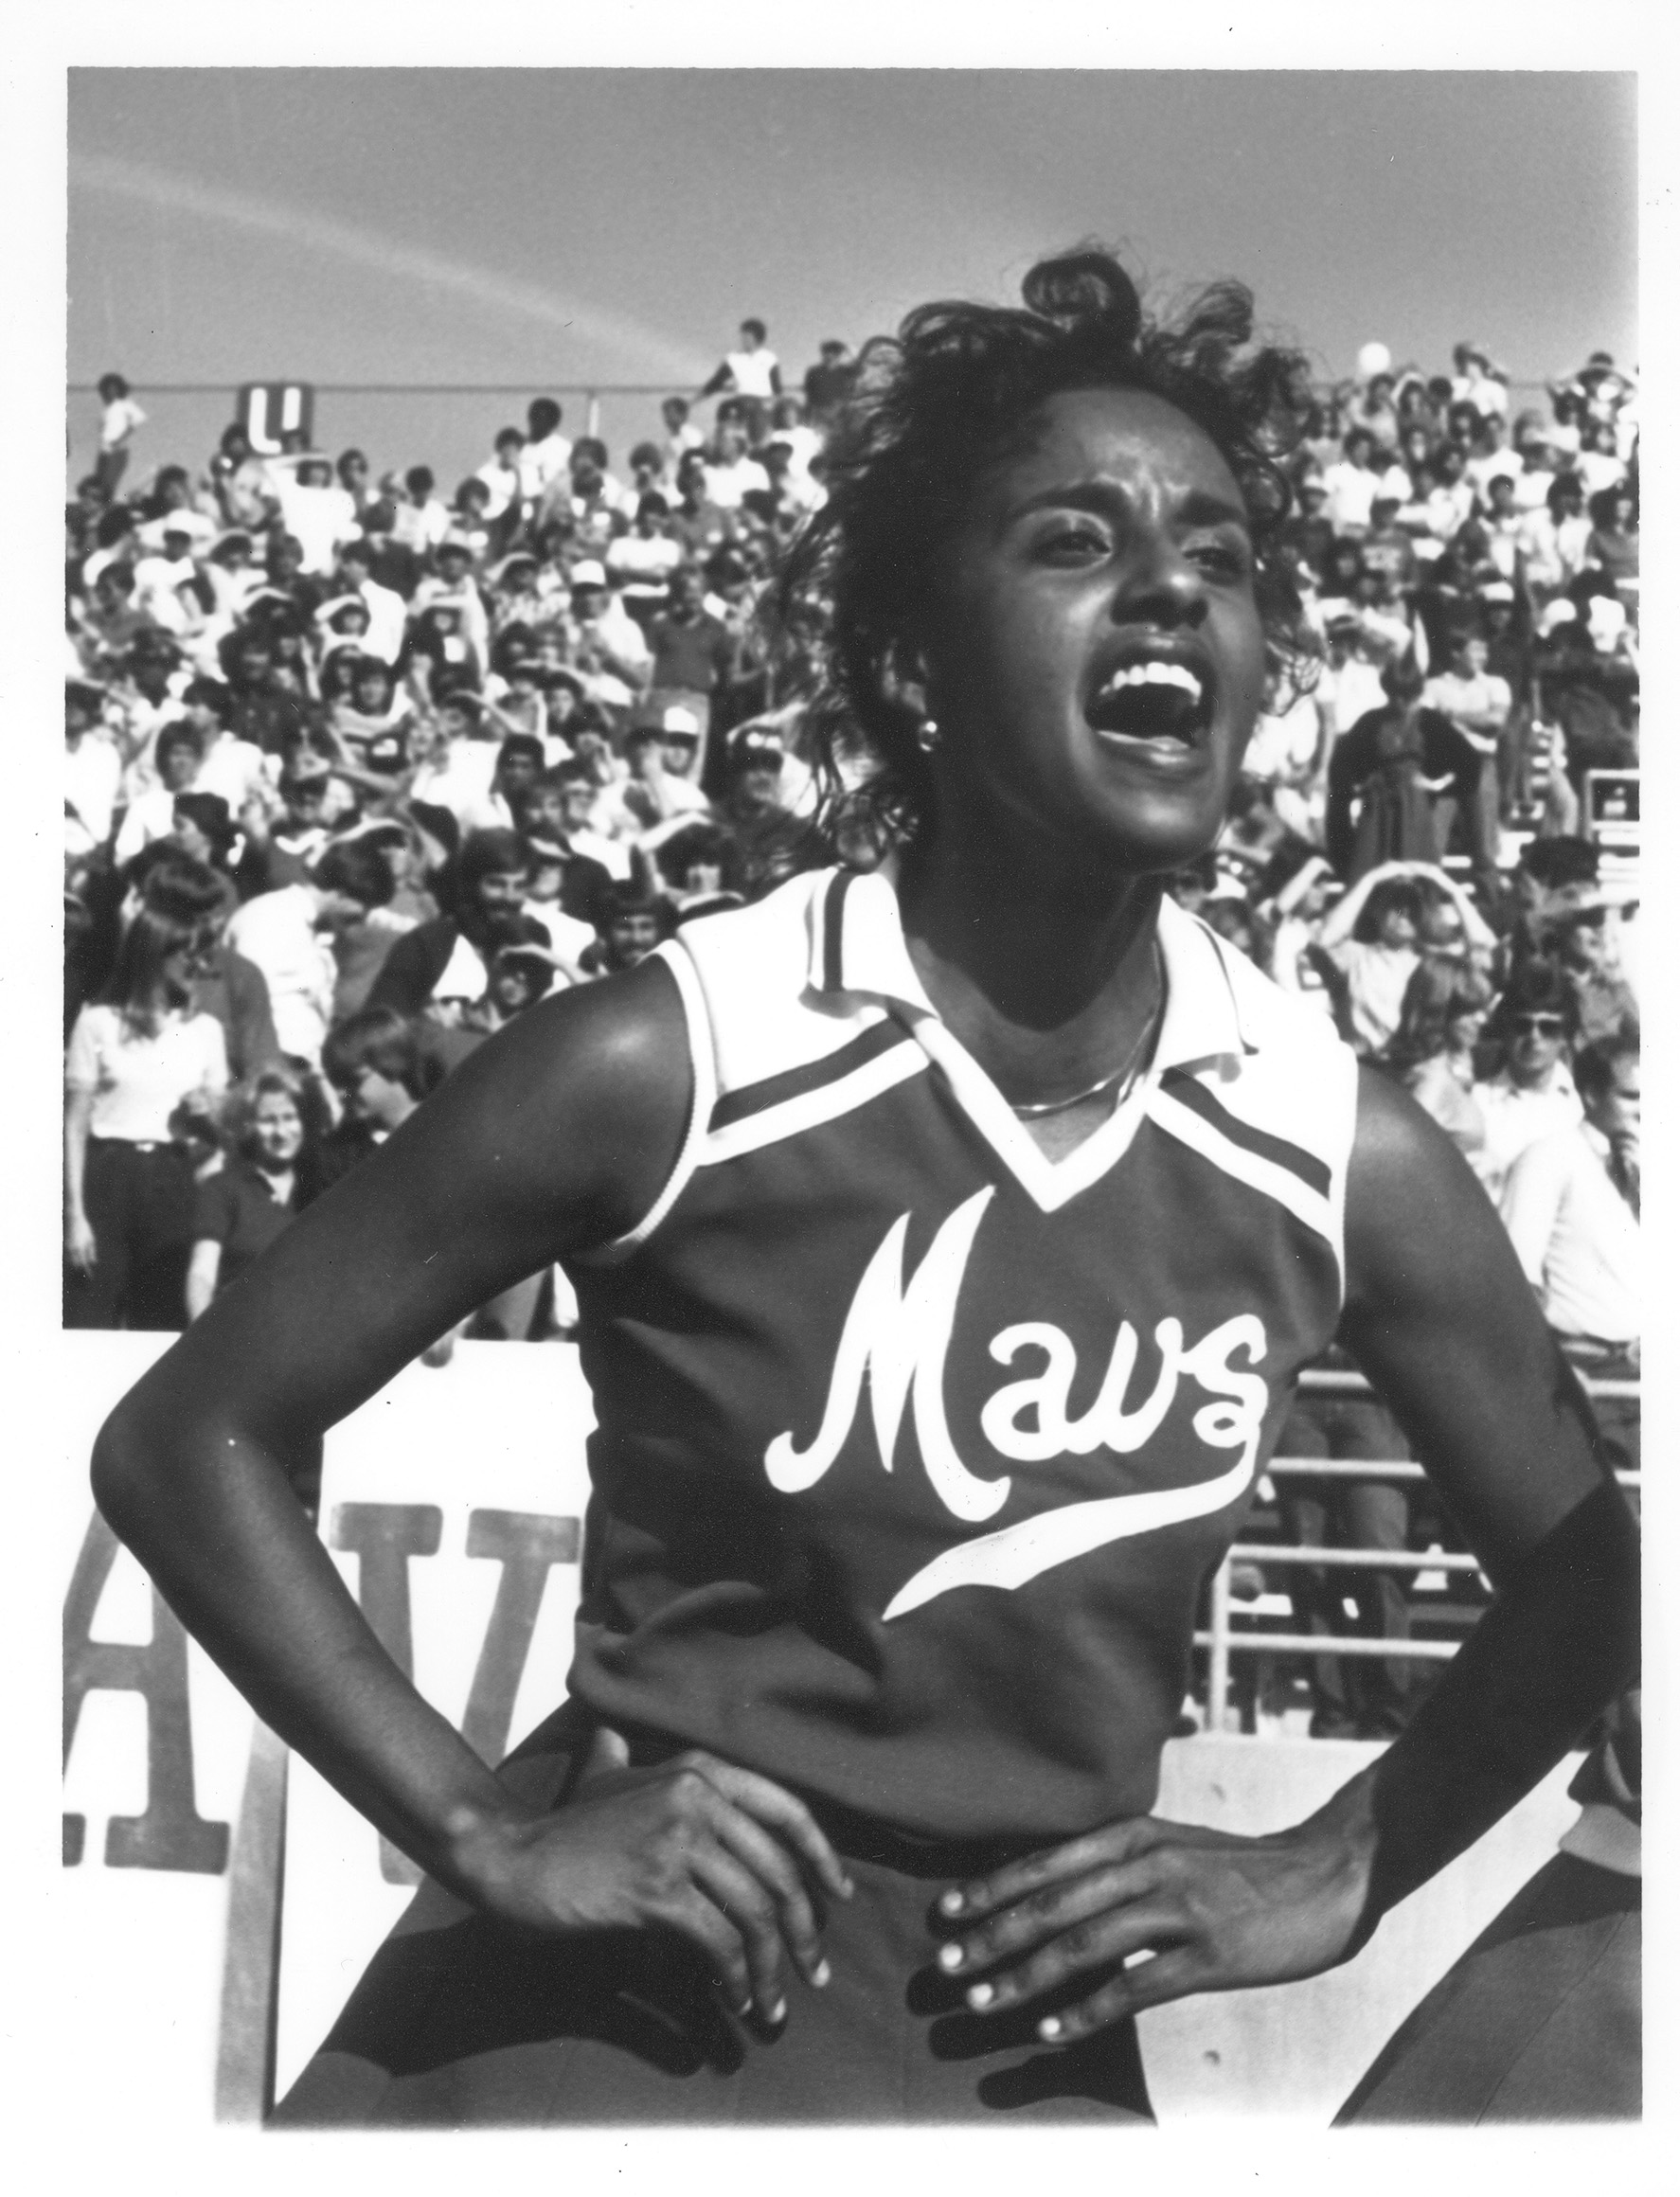 Black and white photo of a cheerleader while cheering at a football game with a large crowd in the stands visible in the background.